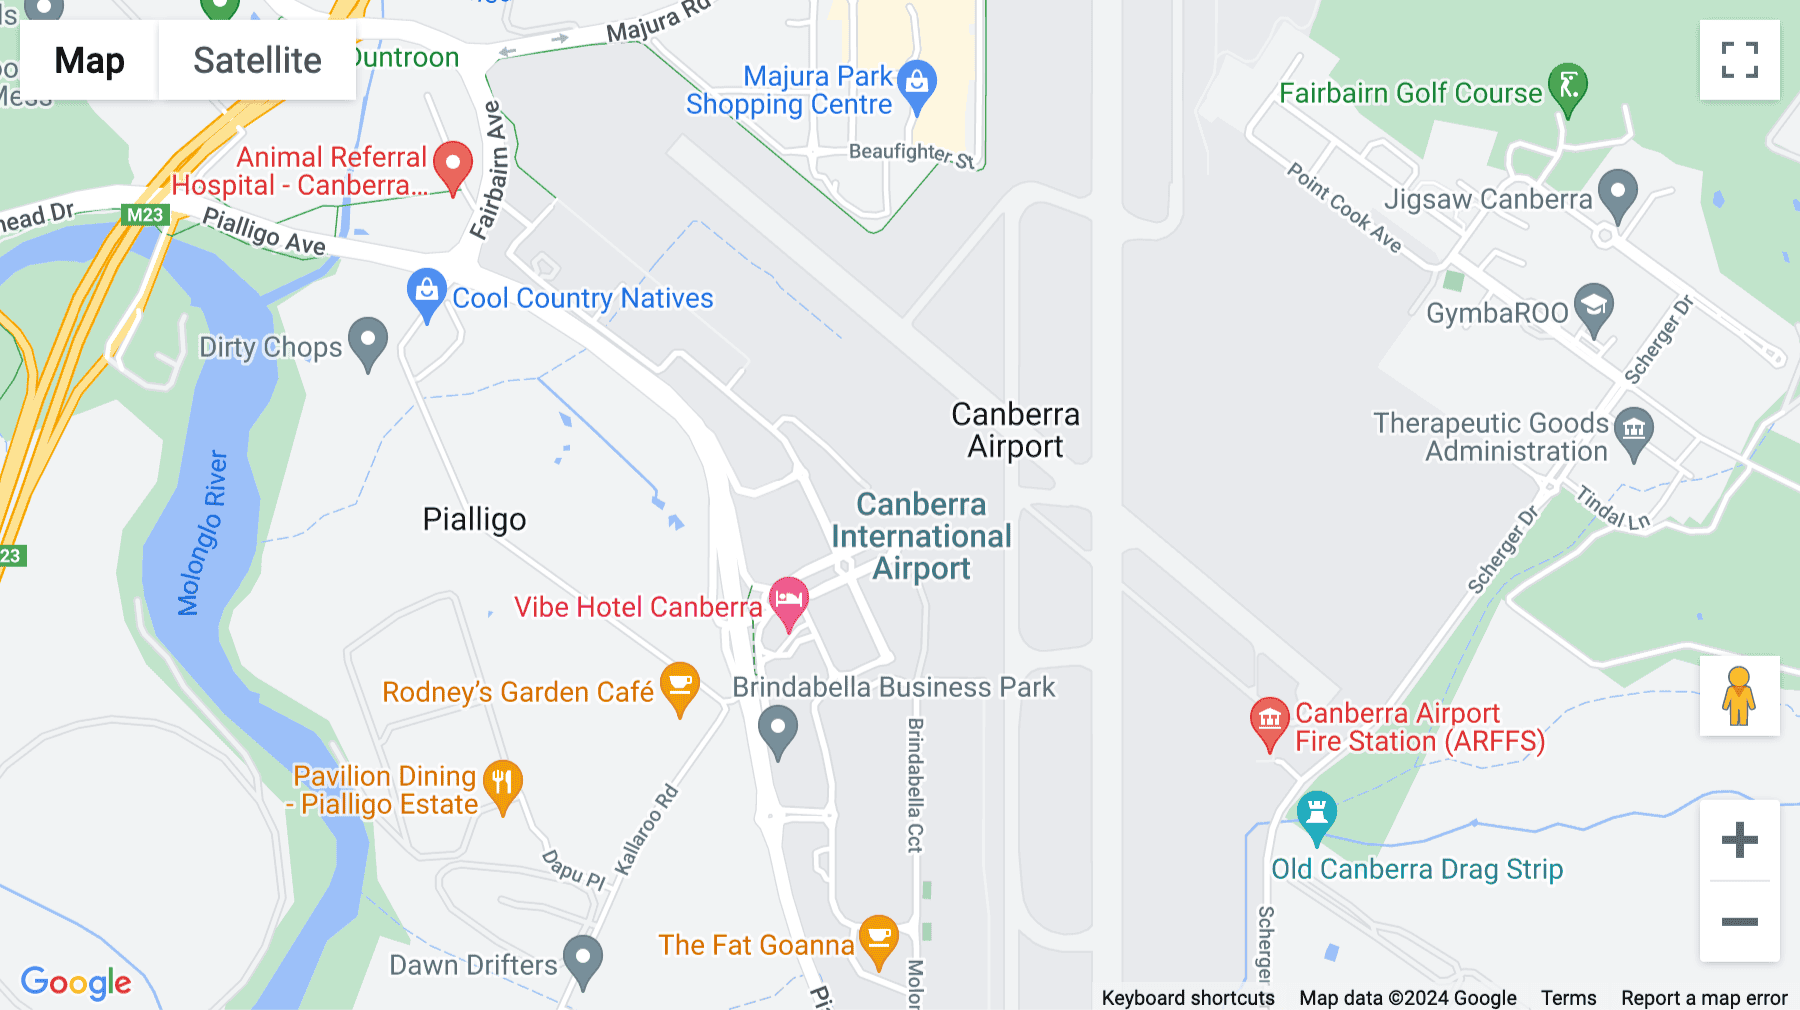 Click for interative map of Gateway Business Center, Level 4, Eastern Plaza Offices, Terminal Circuit, Canberra Airport, Canberra